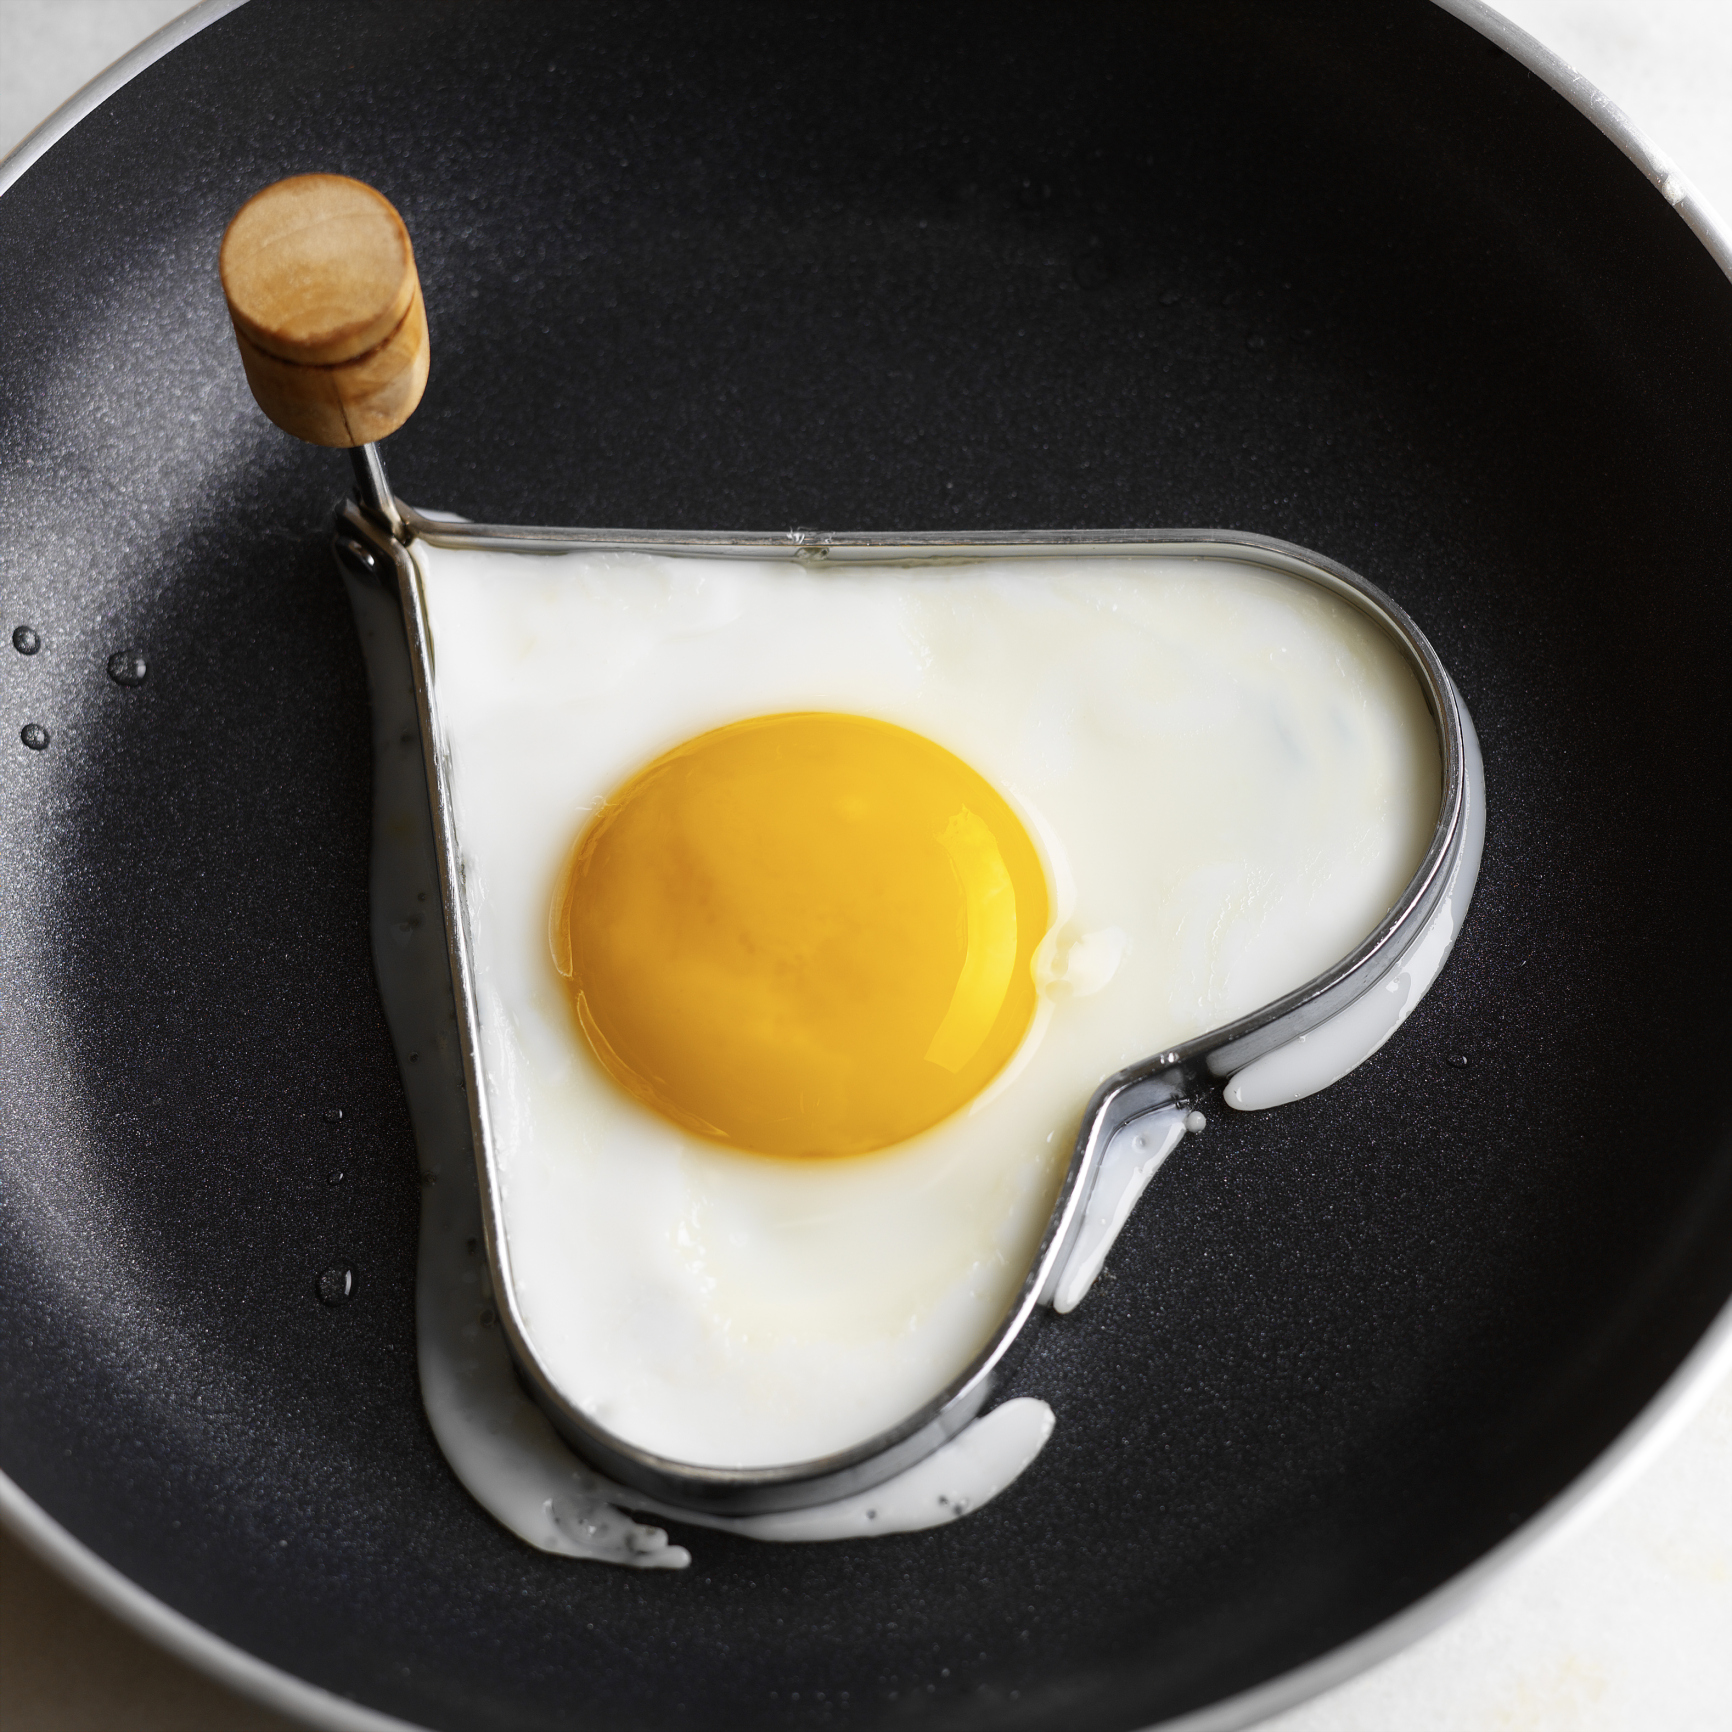 Heart-shaped egg in frying pan with mold